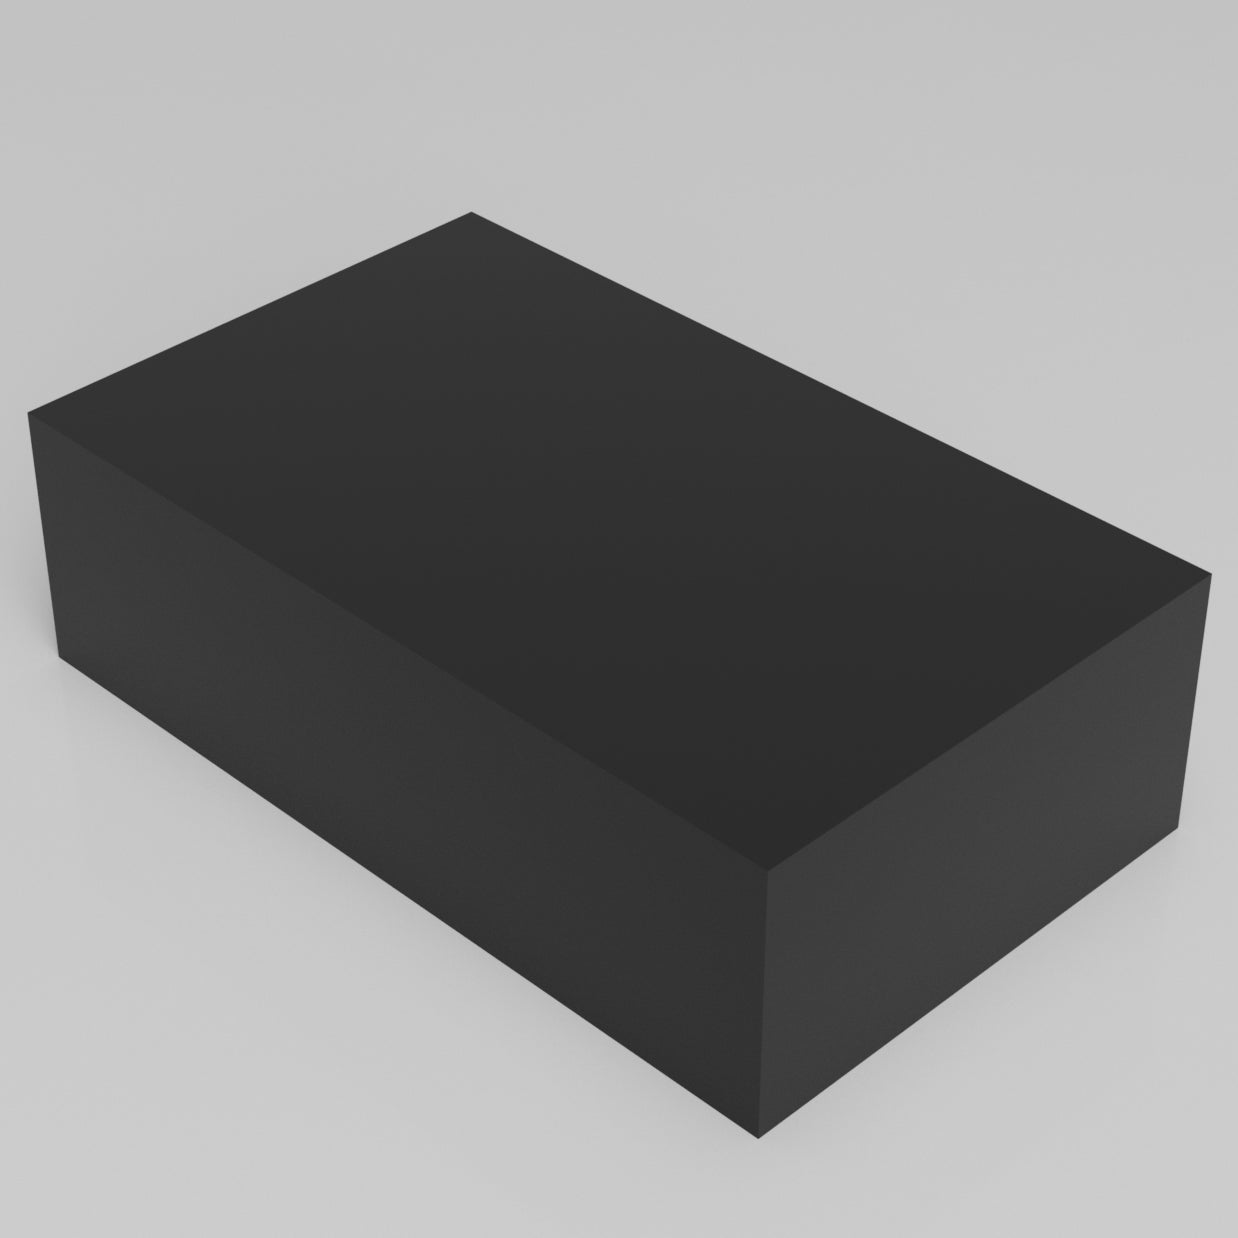 Machinable Wax Rectangular Block Front View 3 Inch by 10 Inch by 6 Inch